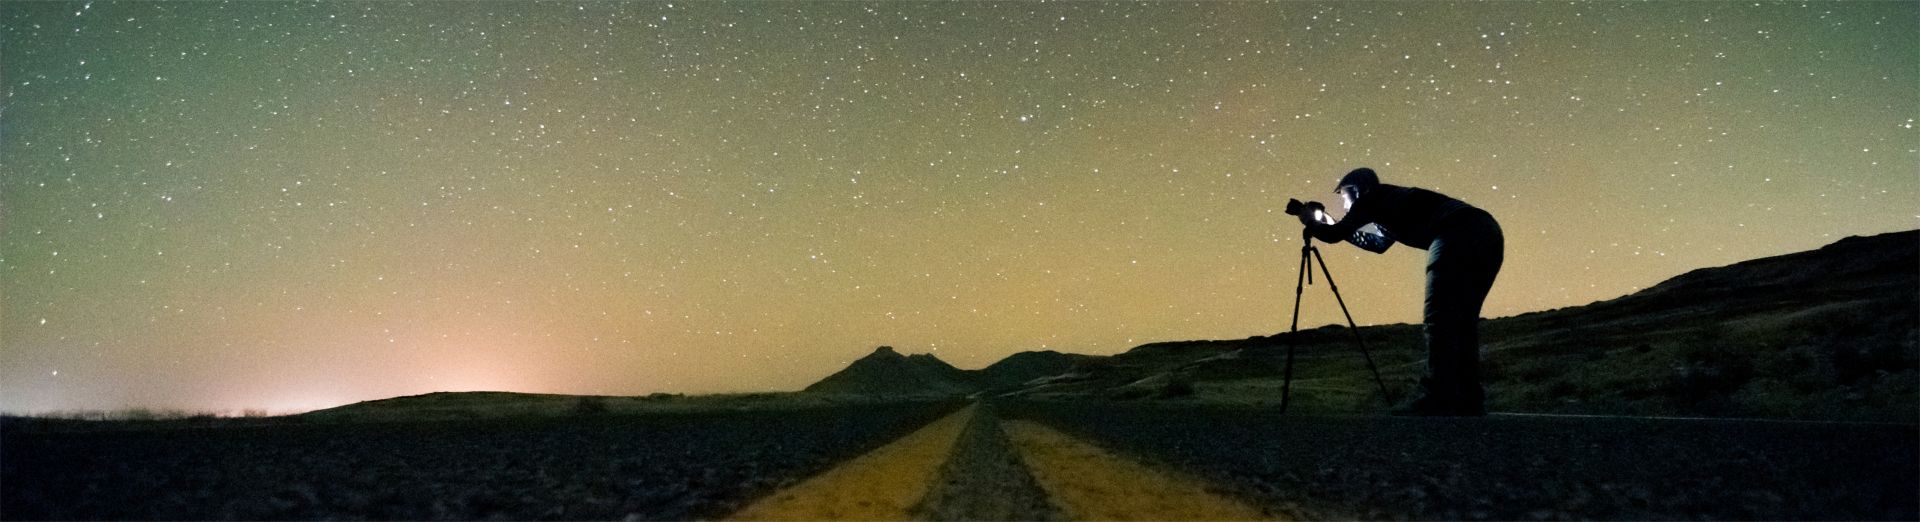 Photo of a man exploring the stars with a camera, representing SAP Road Map Explorer